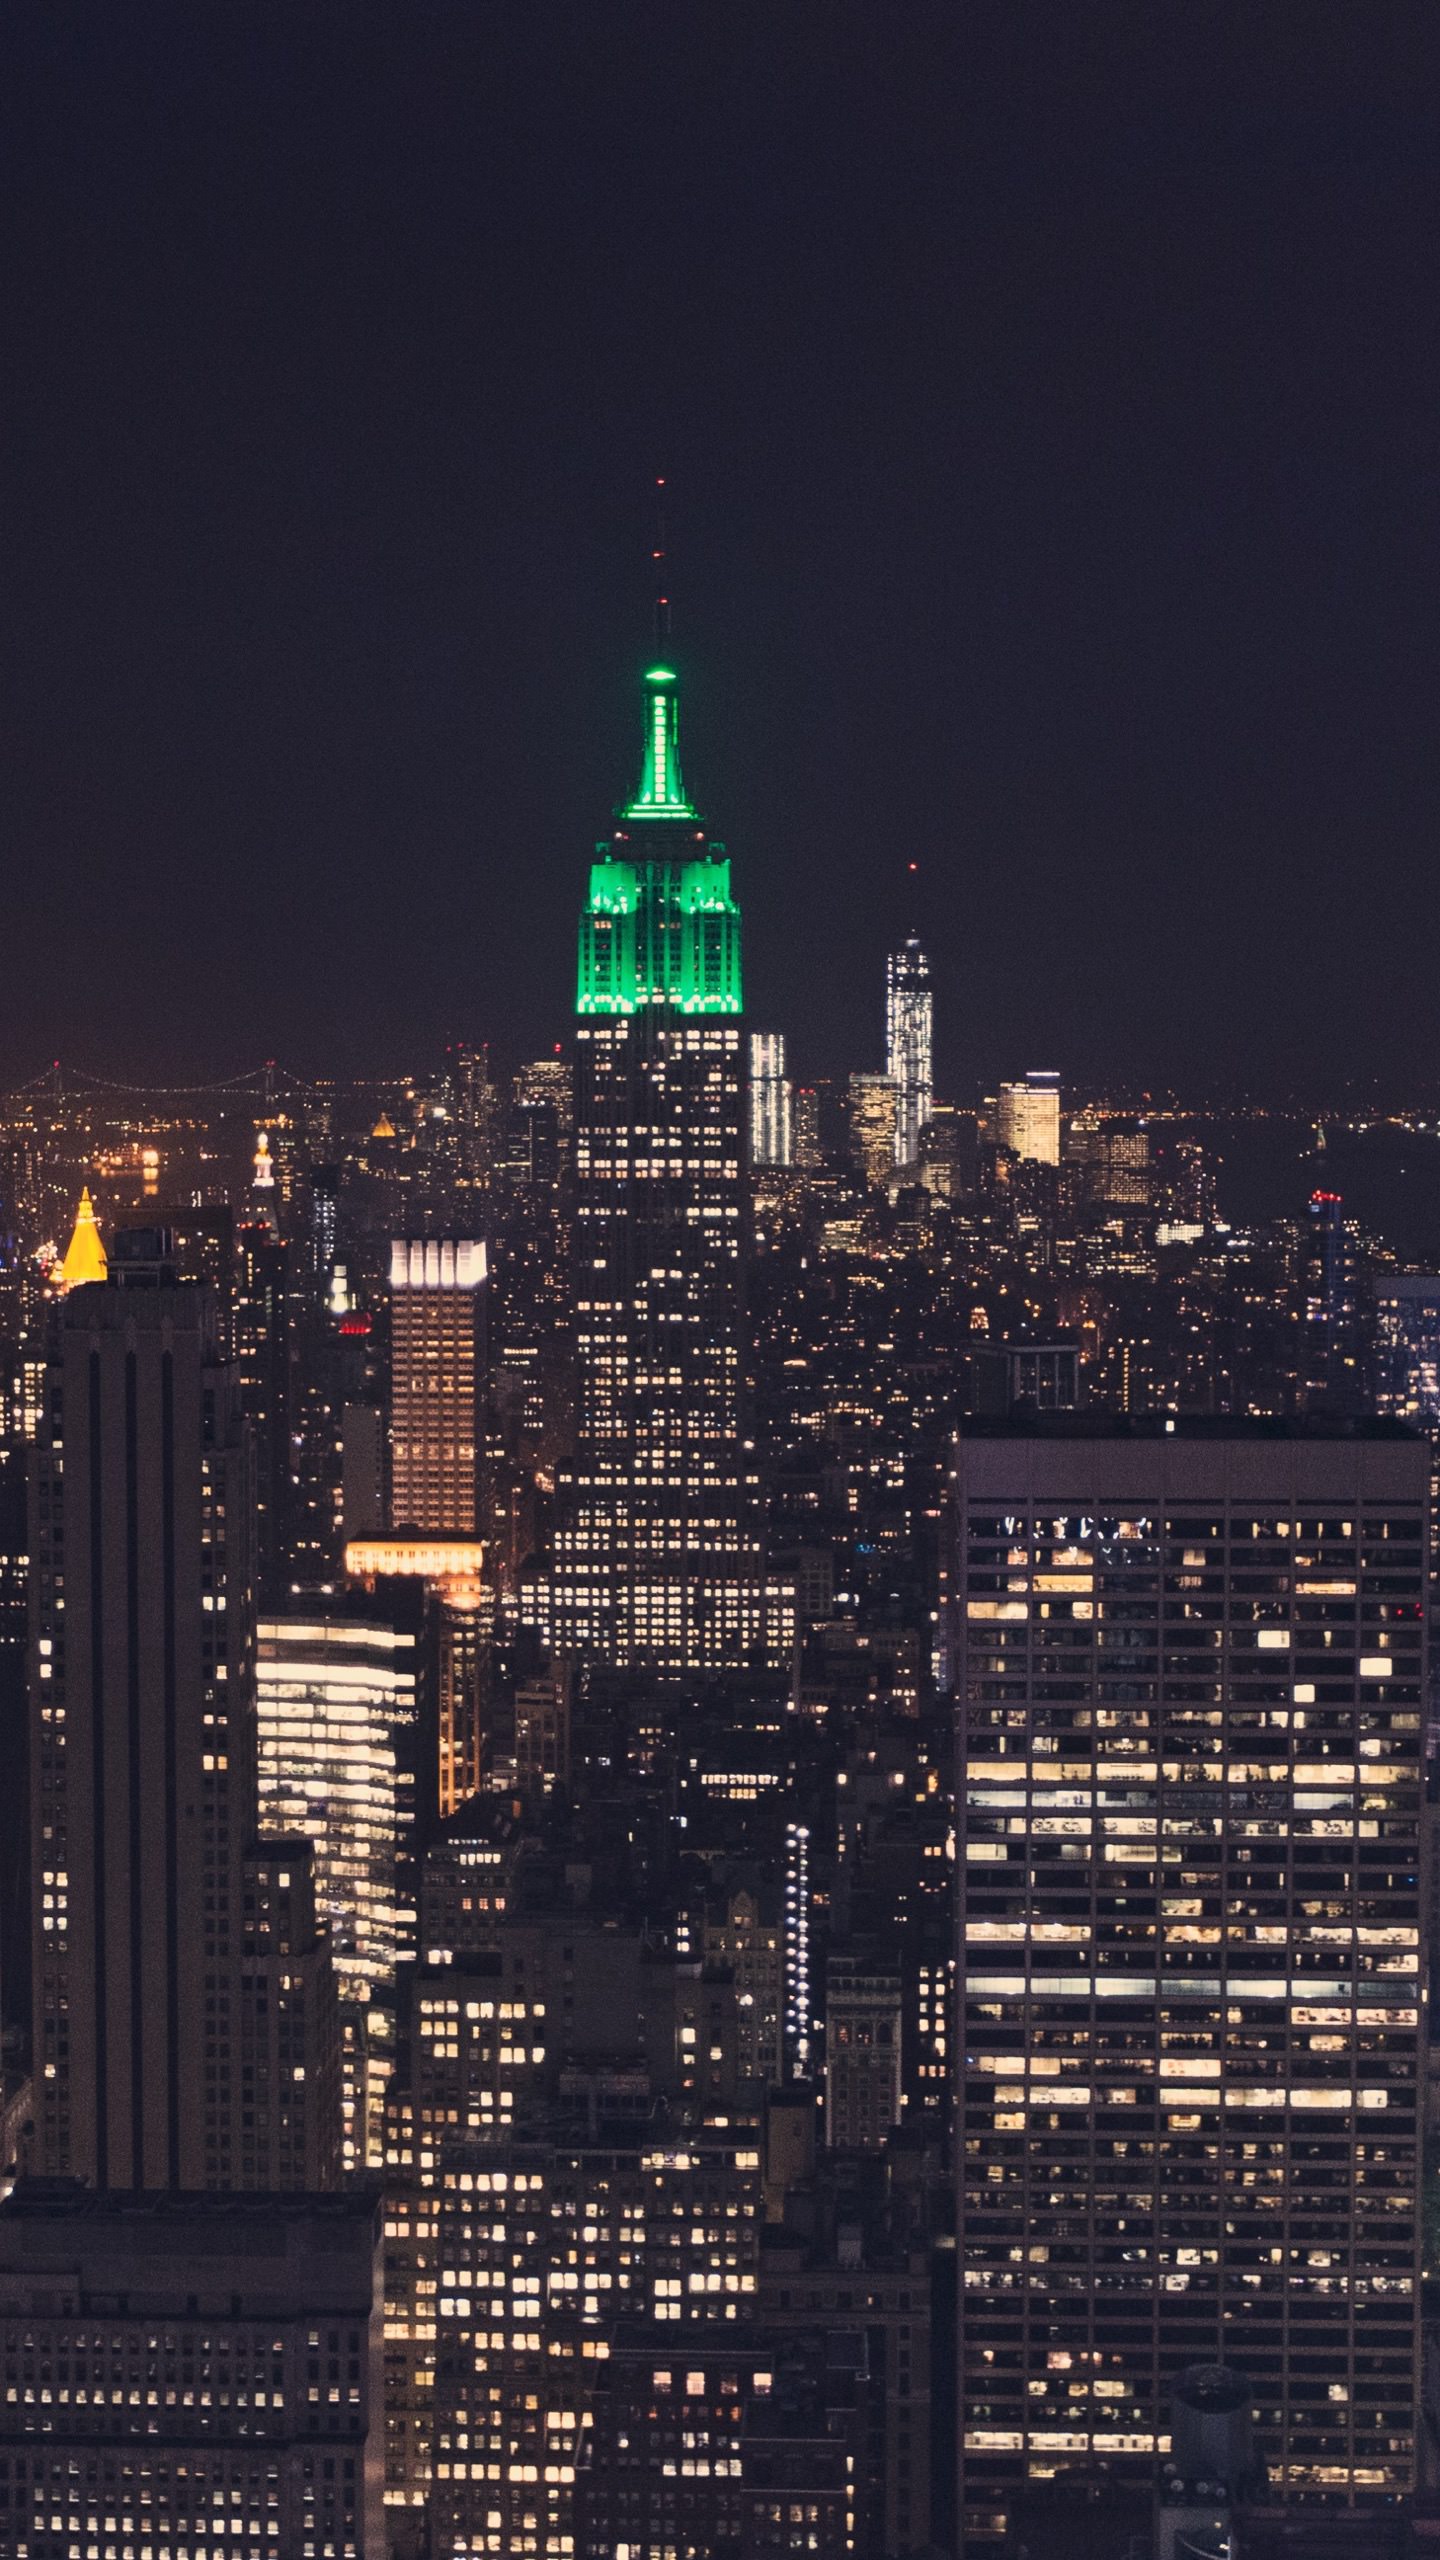 Wallpaper ID: 218559 / empire state building and skyscrapers with lights at  night in new york city, working late 4k wallpaper free download